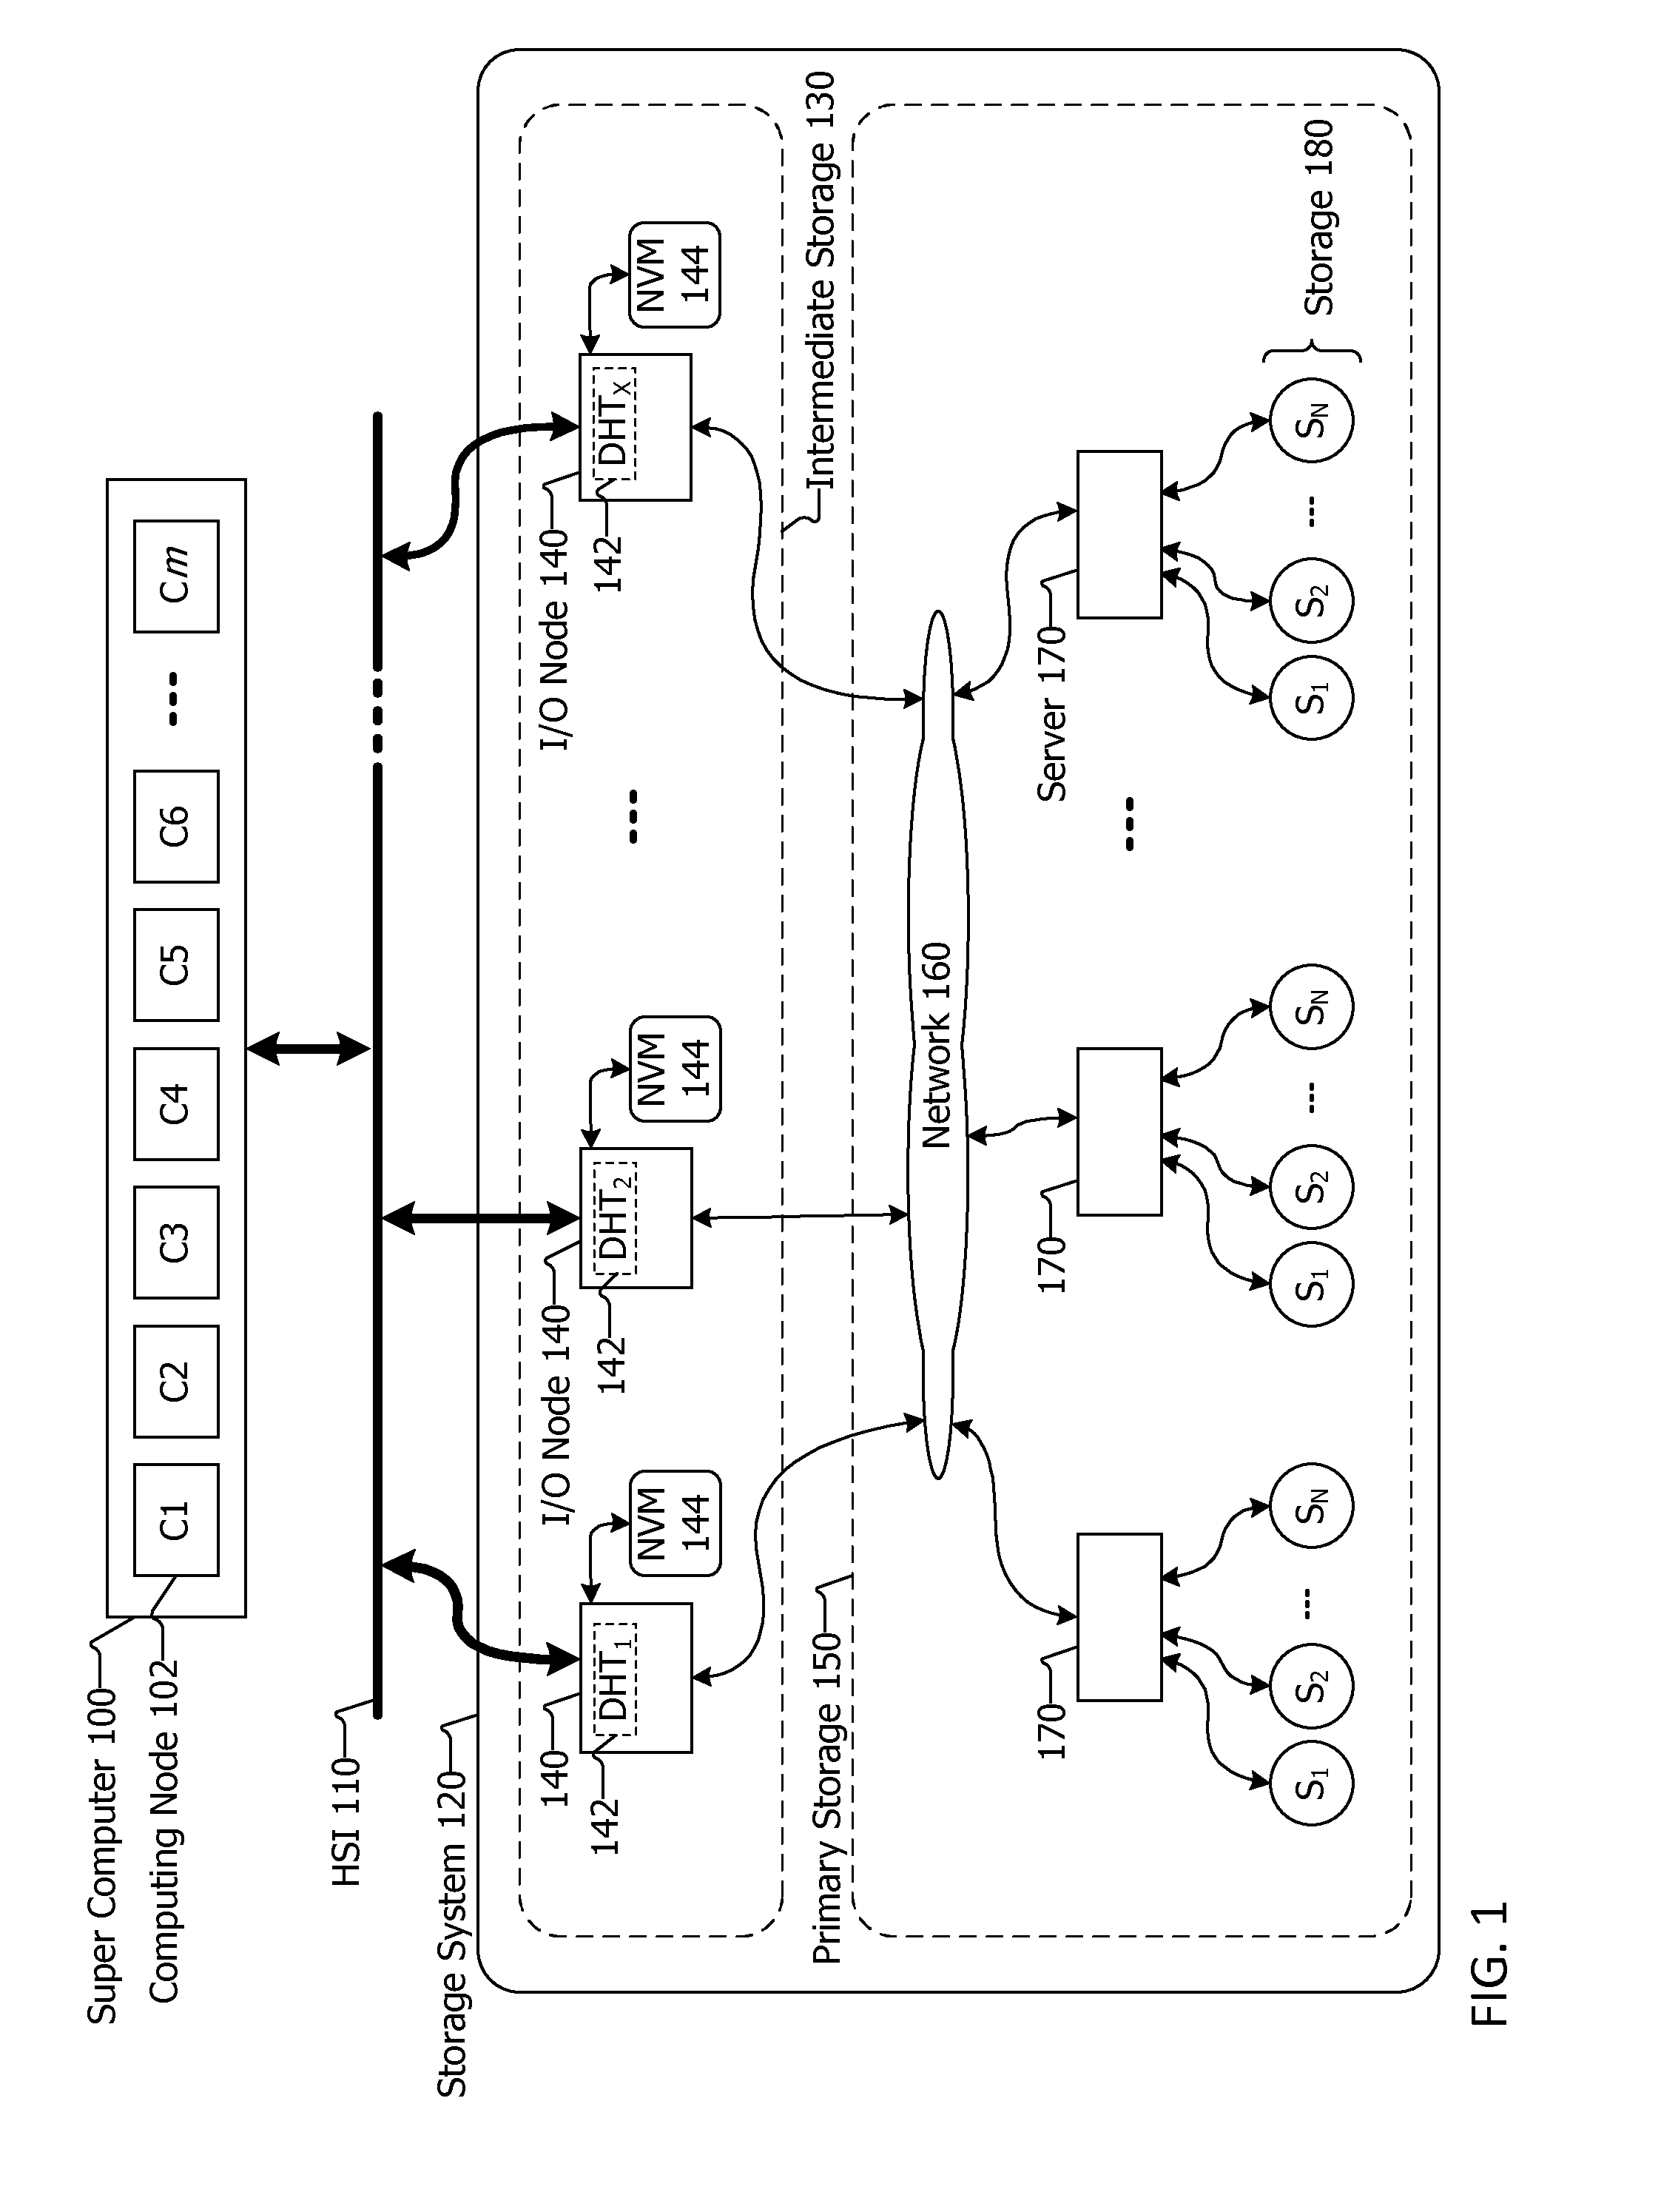 Data storage architecture and system for high performance computing